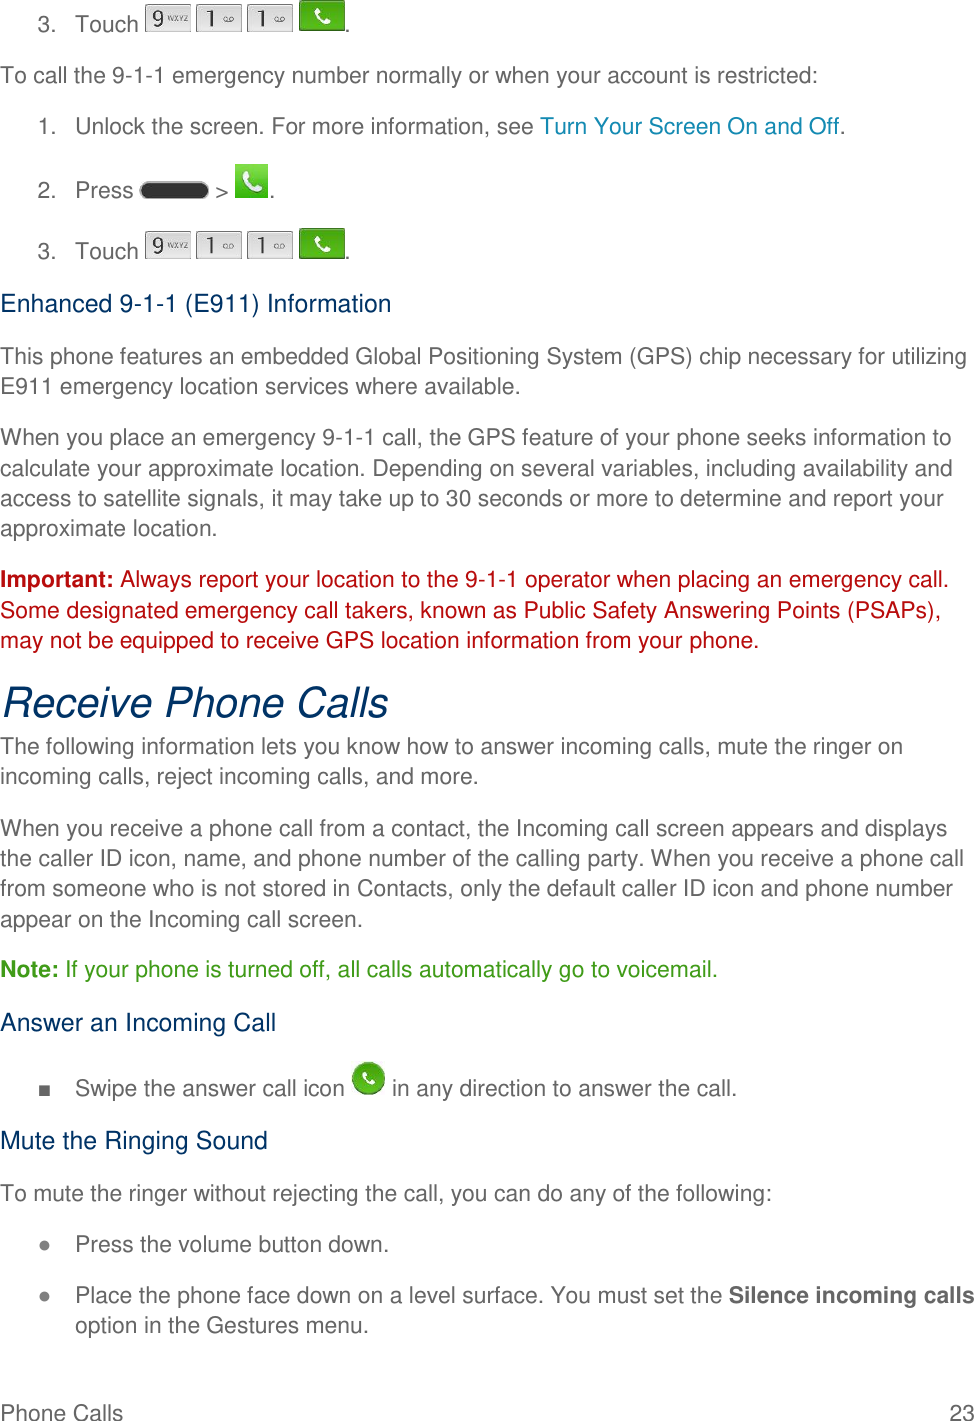 Phone Calls  23 3.  Touch        . To call the 9-1-1 emergency number normally or when your account is restricted: 1.  Unlock the screen. For more information, see Turn Your Screen On and Off. 2.  Press   &gt;  . 3.  Touch        . Enhanced 9-1-1 (E911) Information This phone features an embedded Global Positioning System (GPS) chip necessary for utilizing E911 emergency location services where available. When you place an emergency 9-1-1 call, the GPS feature of your phone seeks information to calculate your approximate location. Depending on several variables, including availability and access to satellite signals, it may take up to 30 seconds or more to determine and report your approximate location. Important: Always report your location to the 9-1-1 operator when placing an emergency call. Some designated emergency call takers, known as Public Safety Answering Points (PSAPs), may not be equipped to receive GPS location information from your phone. Receive Phone Calls The following information lets you know how to answer incoming calls, mute the ringer on incoming calls, reject incoming calls, and more. When you receive a phone call from a contact, the Incoming call screen appears and displays the caller ID icon, name, and phone number of the calling party. When you receive a phone call from someone who is not stored in Contacts, only the default caller ID icon and phone number appear on the Incoming call screen. Note: If your phone is turned off, all calls automatically go to voicemail. Answer an Incoming Call ■  Swipe the answer call icon   in any direction to answer the call. Mute the Ringing Sound To mute the ringer without rejecting the call, you can do any of the following: ● Press the volume button down. ● Place the phone face down on a level surface. You must set the Silence incoming calls option in the Gestures menu. 